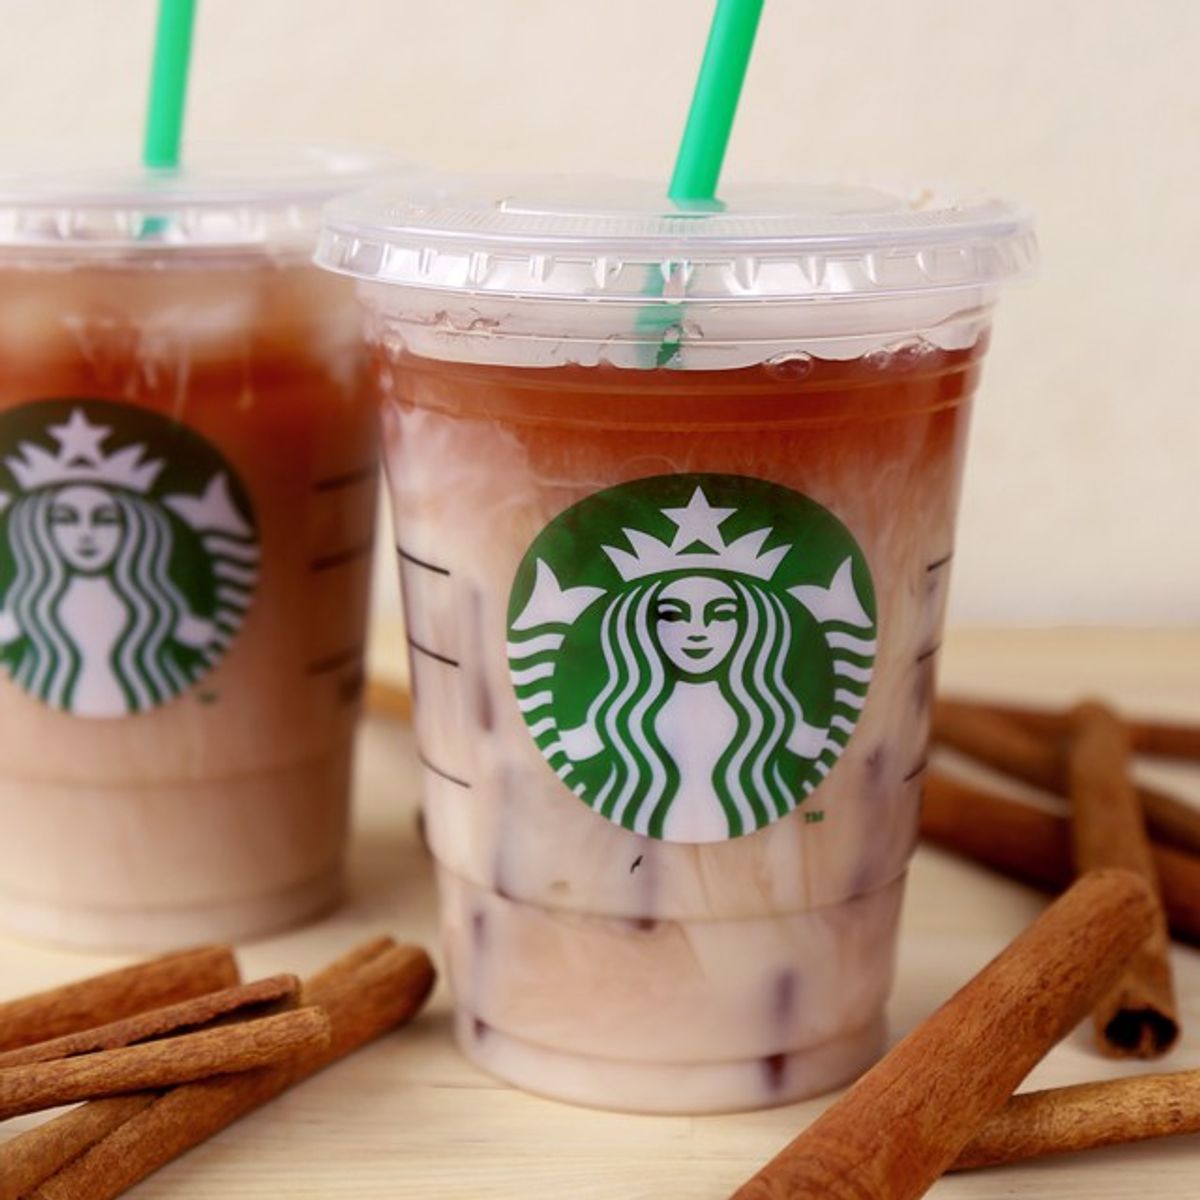 5 Reasons Starbucks Chai Tea Latte Has Caused My Life To Spiral Out Of Control